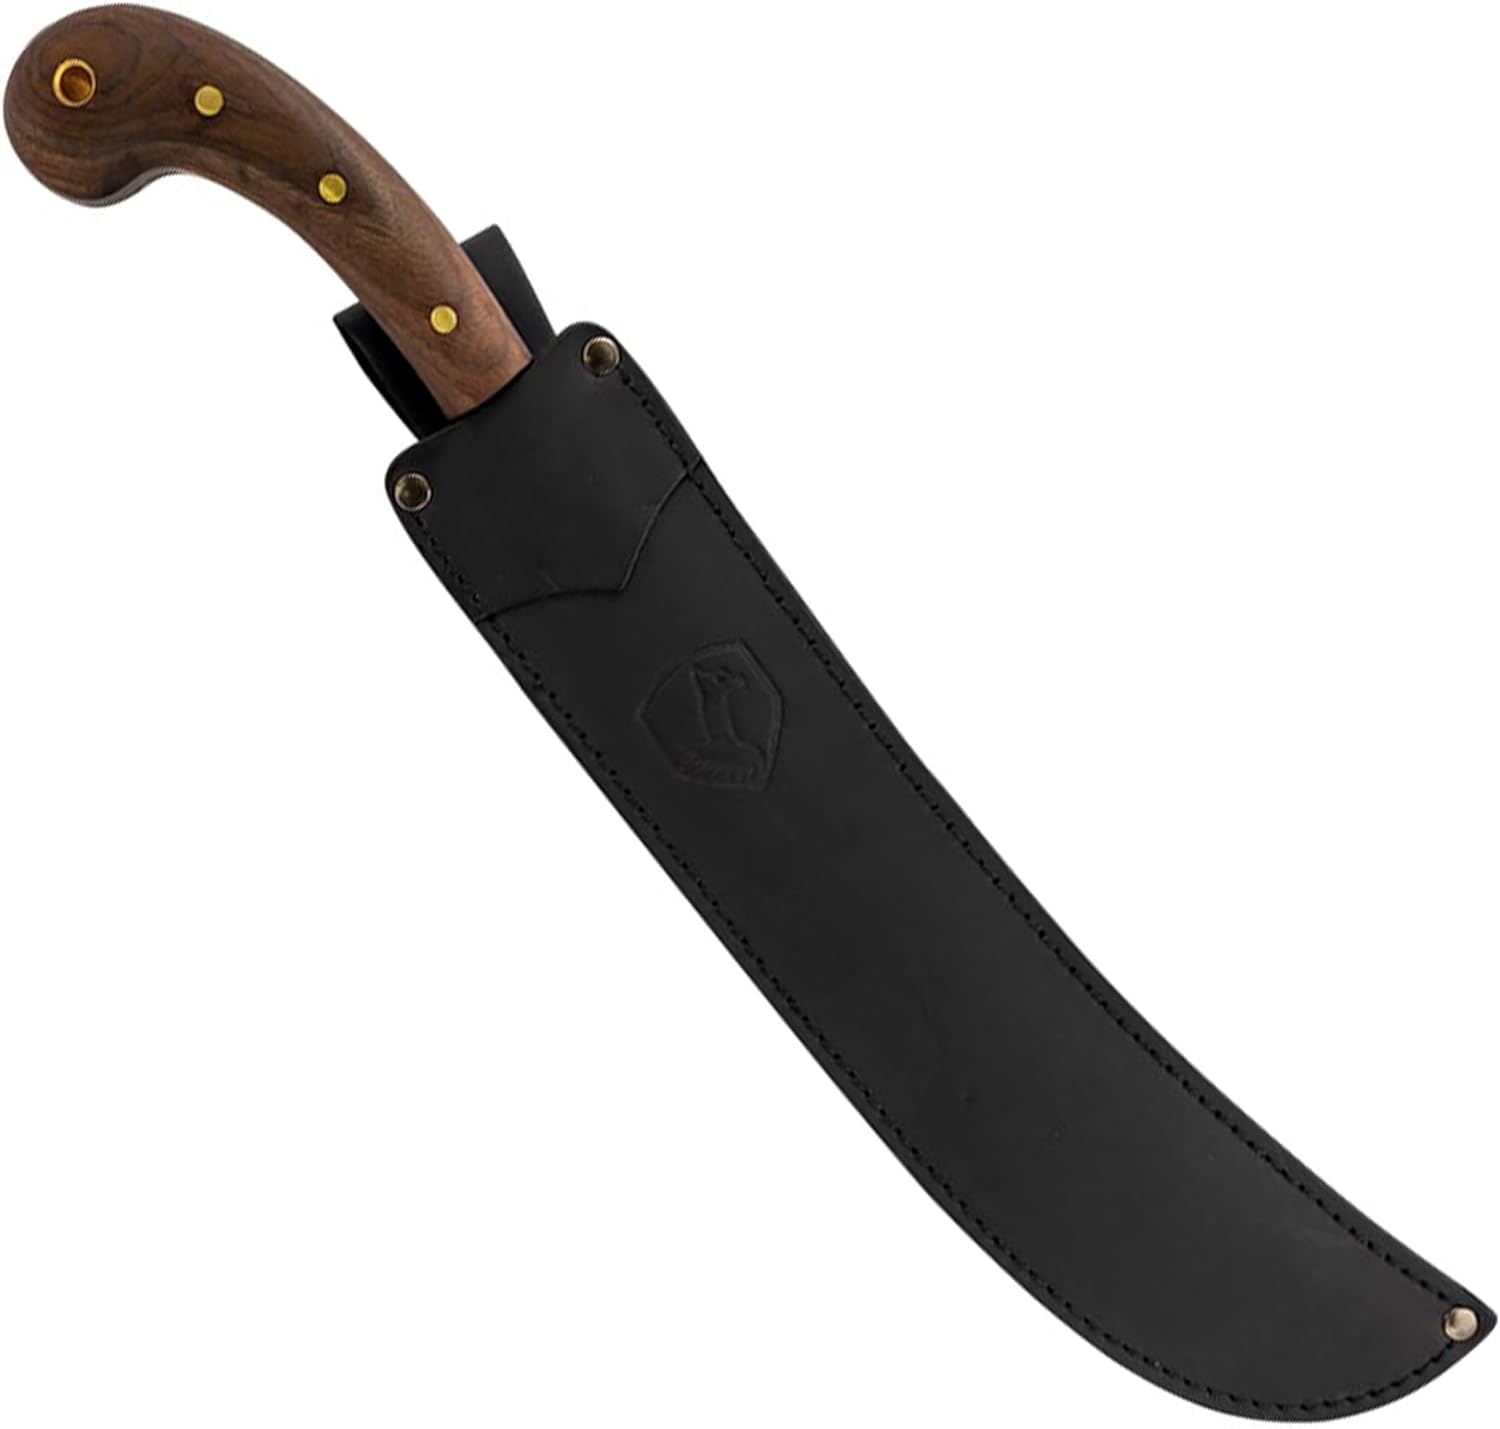 Condor Tool & Knife Golok Machete with Leather Sheath | Heavy Duty Machete | High Carbon Steel | Walnut Handle | Hand Crafted Leather Sheath | Tactical Machete | 0.2in Thick | 14.5in Blade | 30.7oz